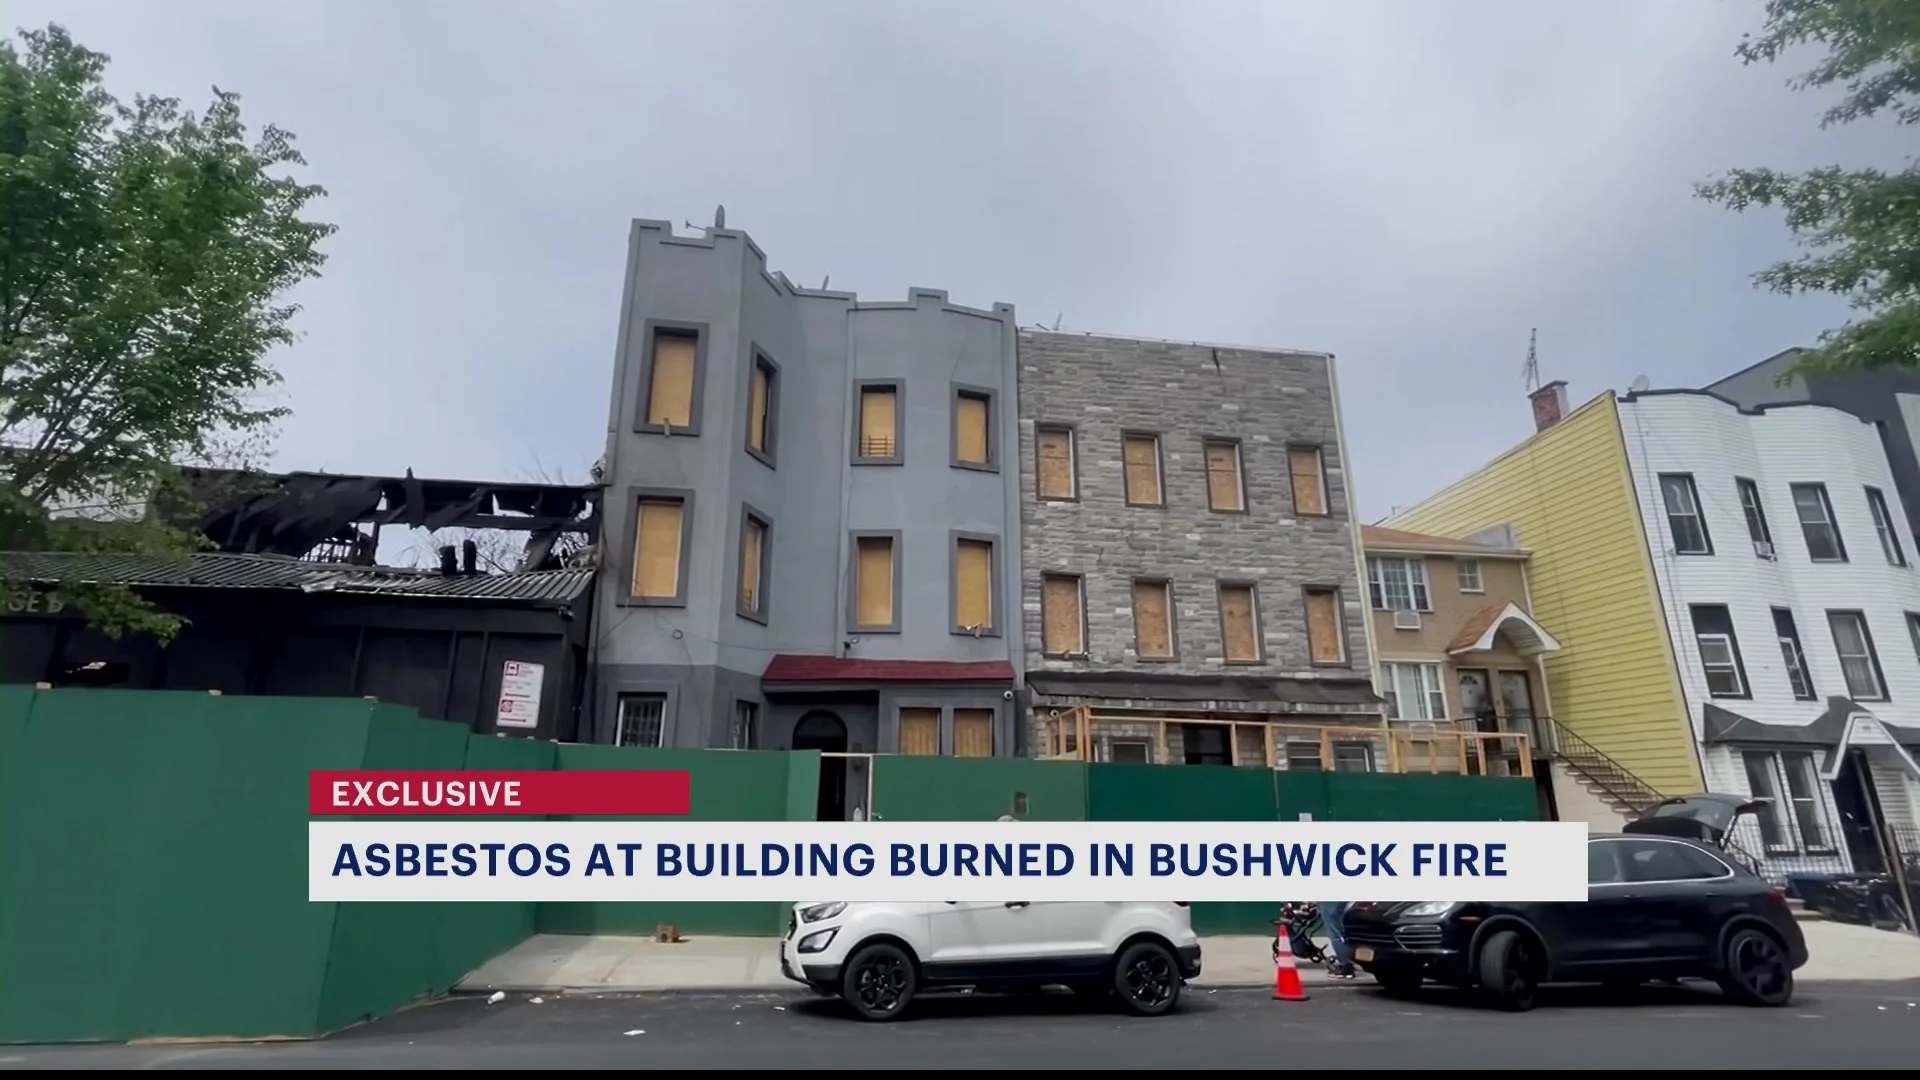 DEP confirms that some buildings in large Bushwick fire contain asbestos